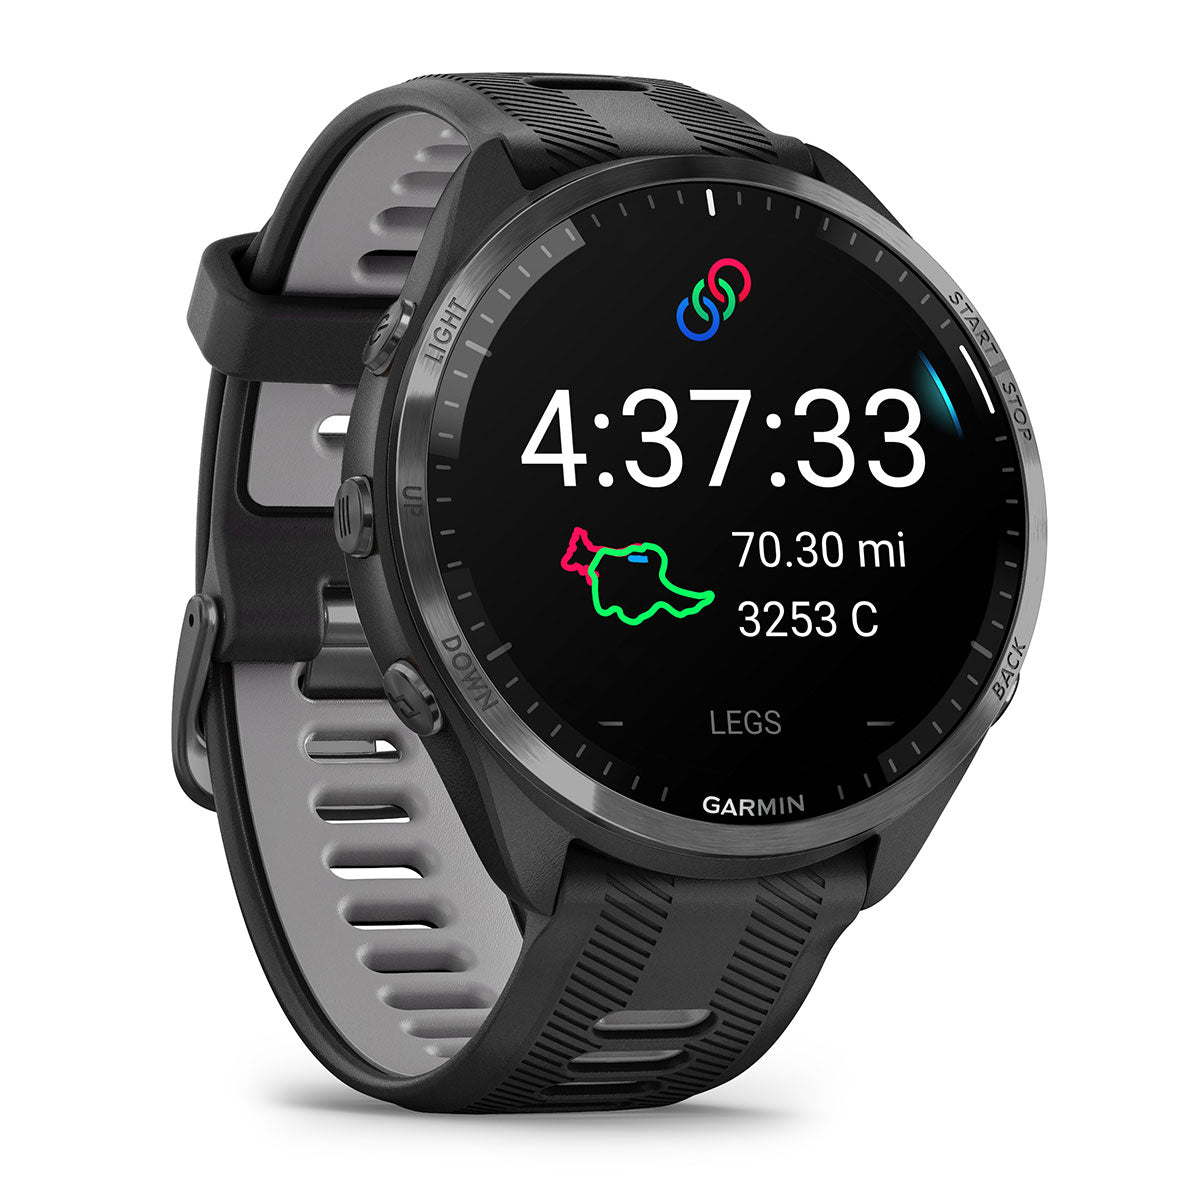 Garmin Forerunner 965 (Black/Powder Gray) Premium Running & Triathlon GPS Smartwatch | Bundle with PlayBetter Screen Protectors & Portable Charger - image 5 of 9